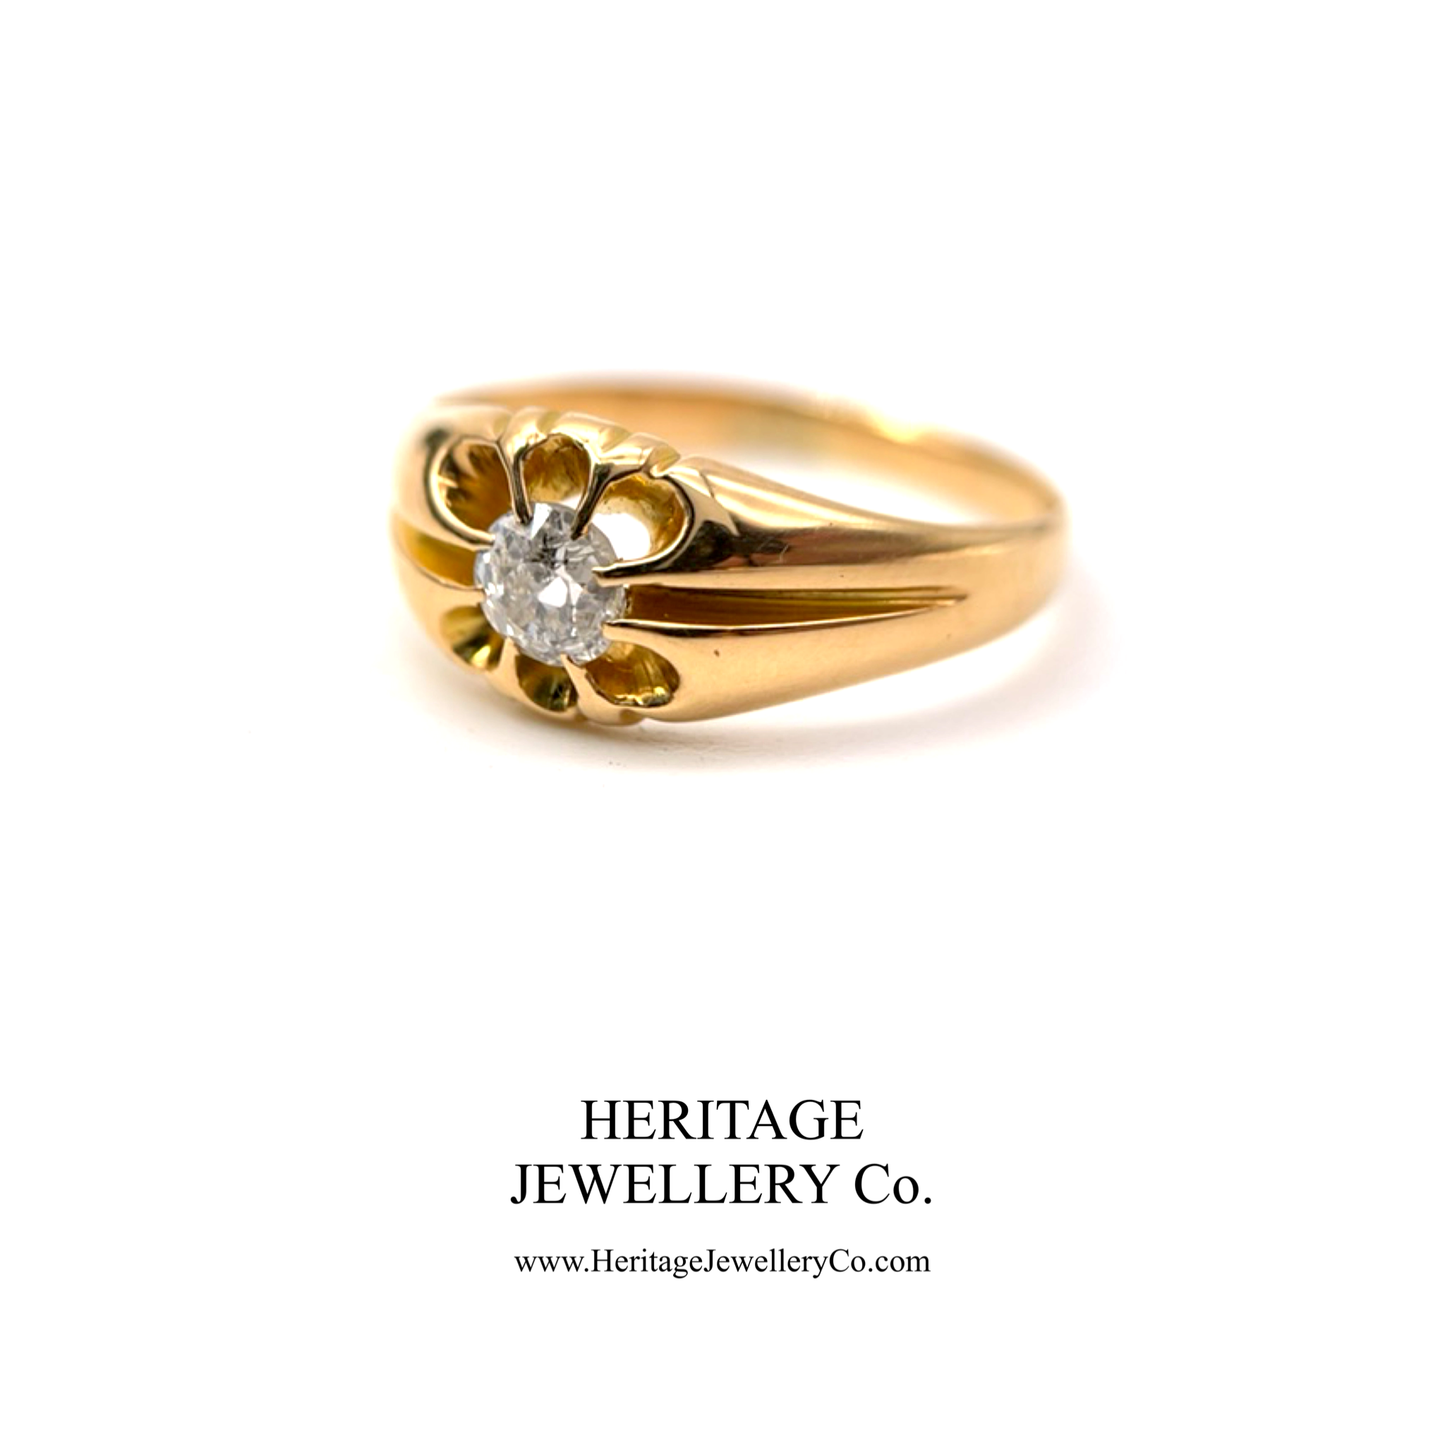 Antique Solitaire Diamond Gypsy Ring (c. 1870-1900)